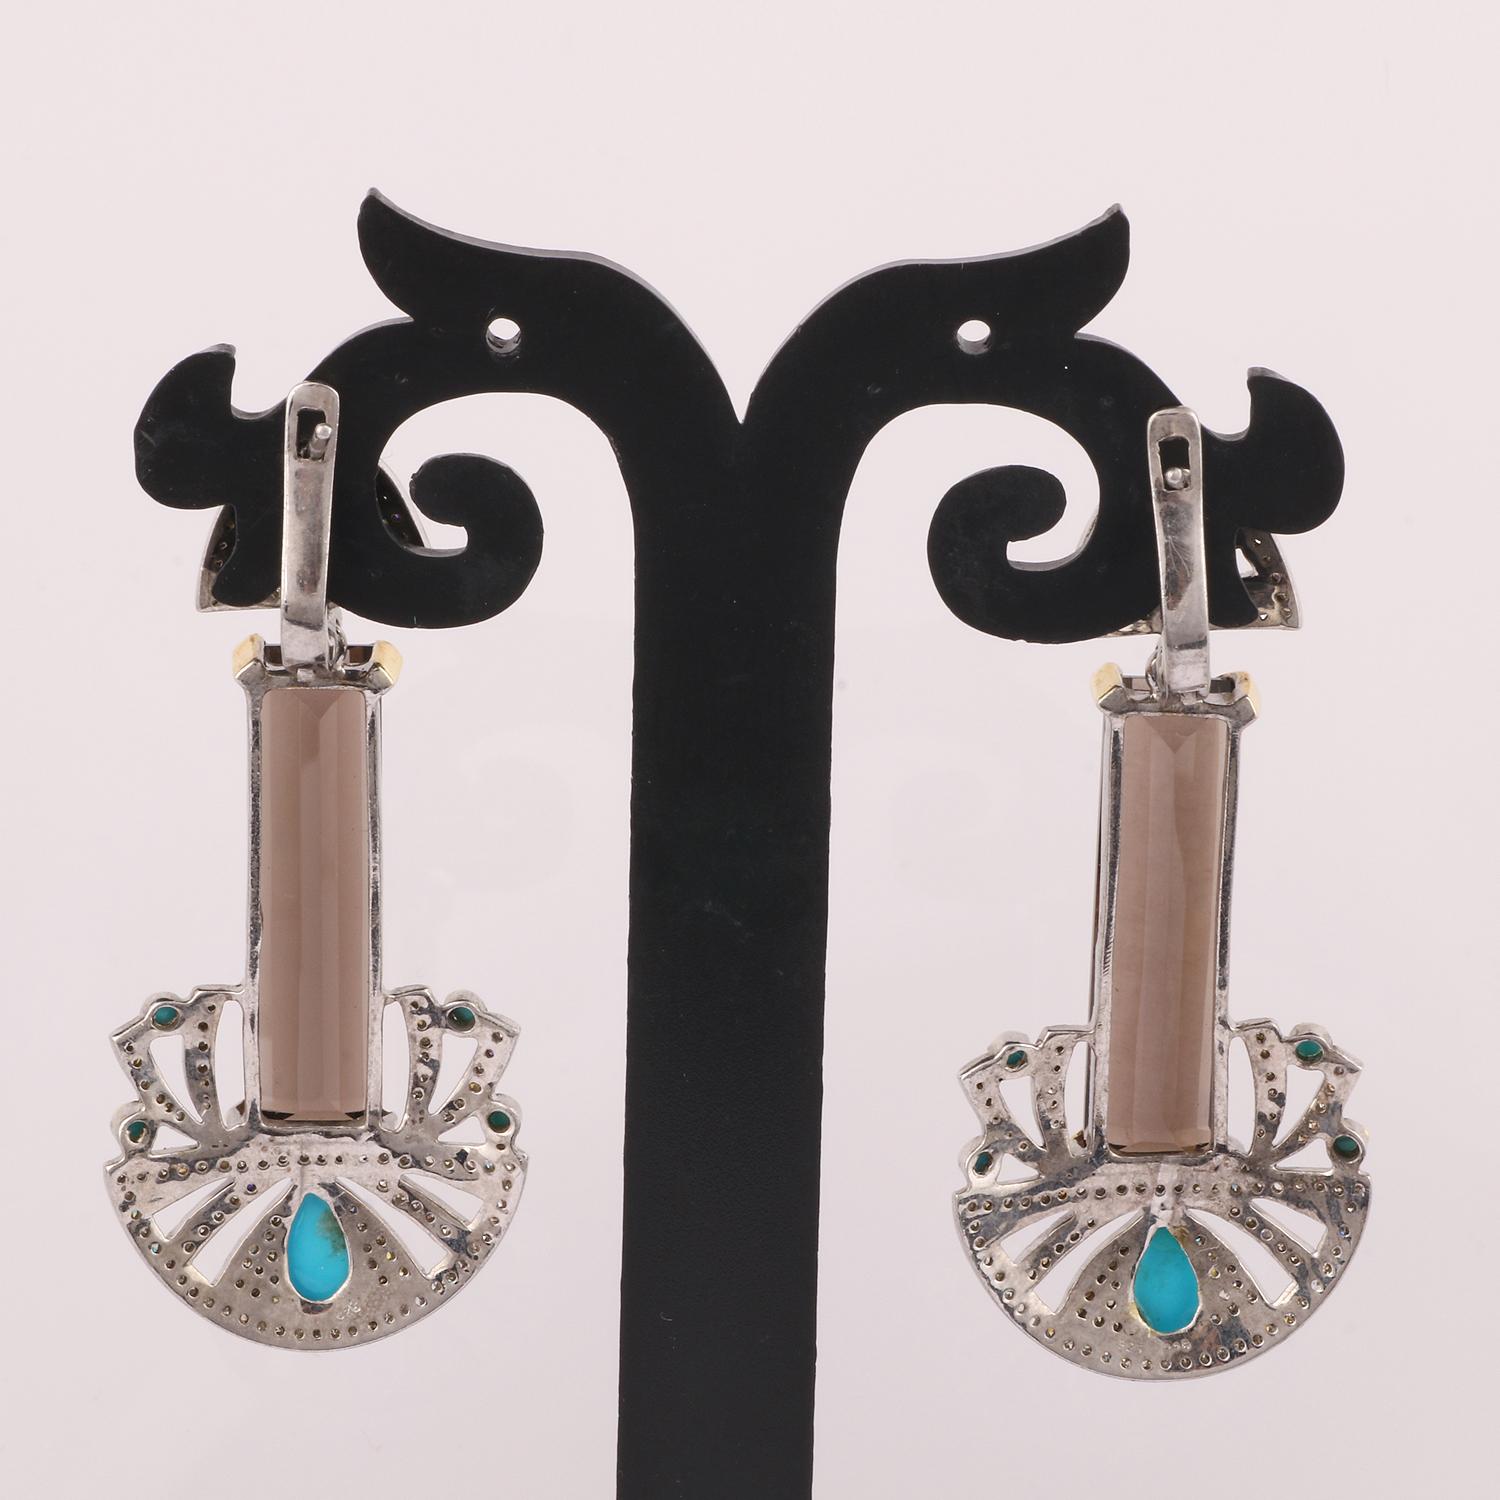 Round Cut Victorian Style Diamond Silver Earrings, Turquoise Smoky Quartz Dangle Earrings For Sale